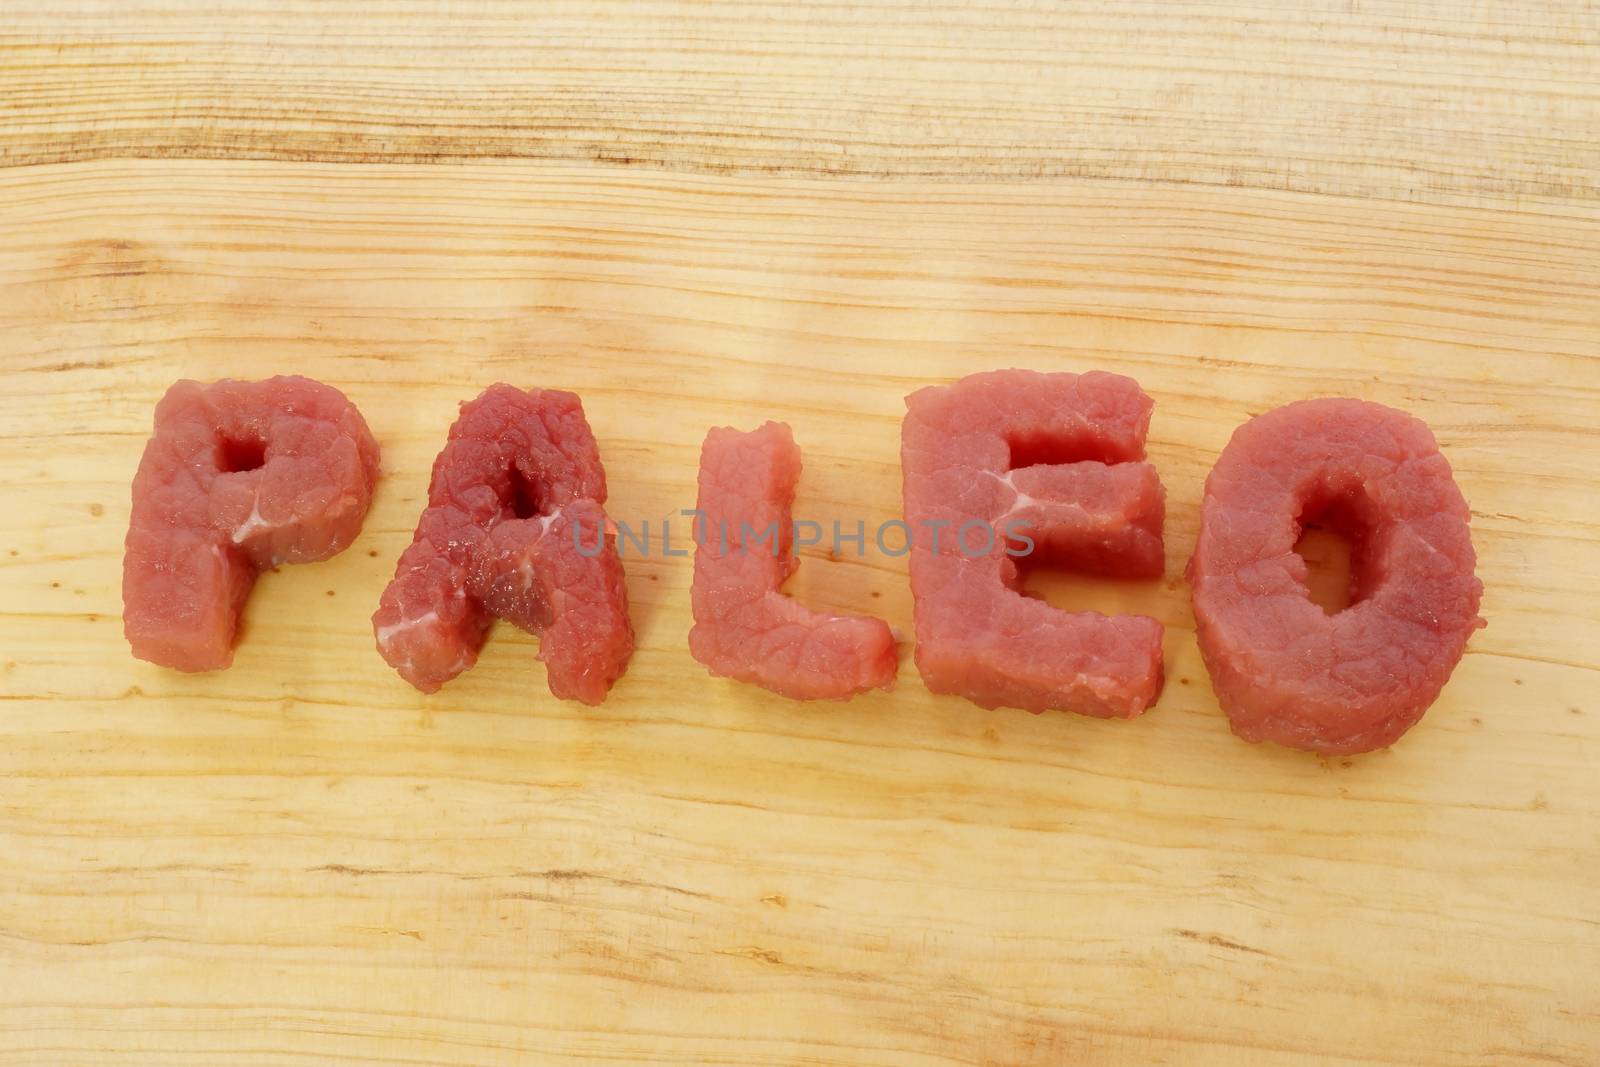 health nutrition
"paleo" letters cut from meat. Paleo diet.